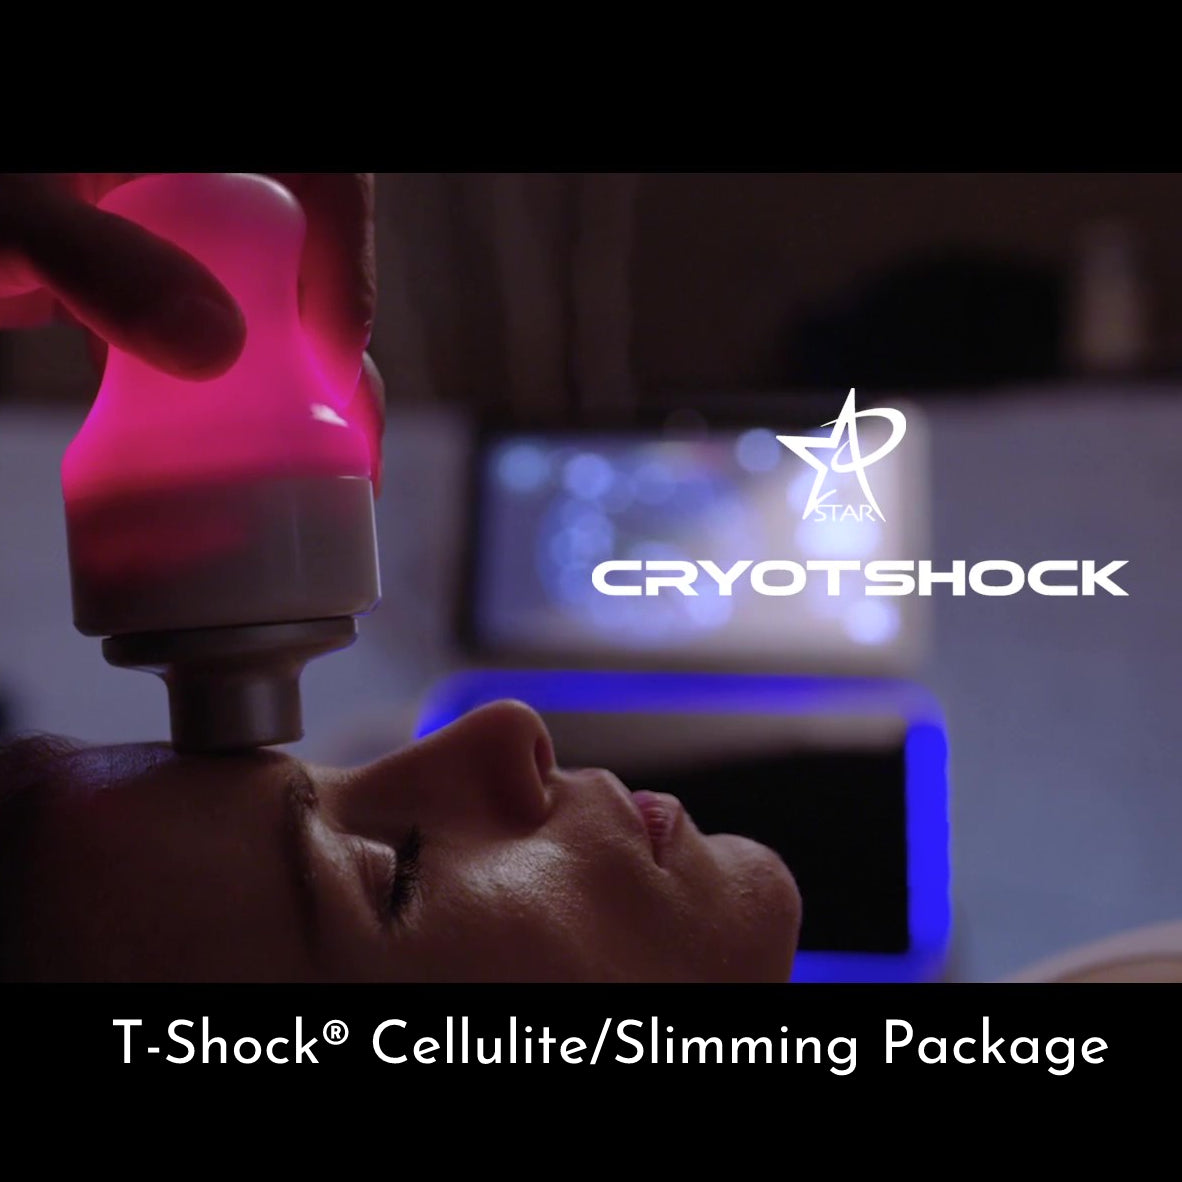 T-SHOCK Cellulite/Slimming w/lymphatic drainage 4 Treatment Package